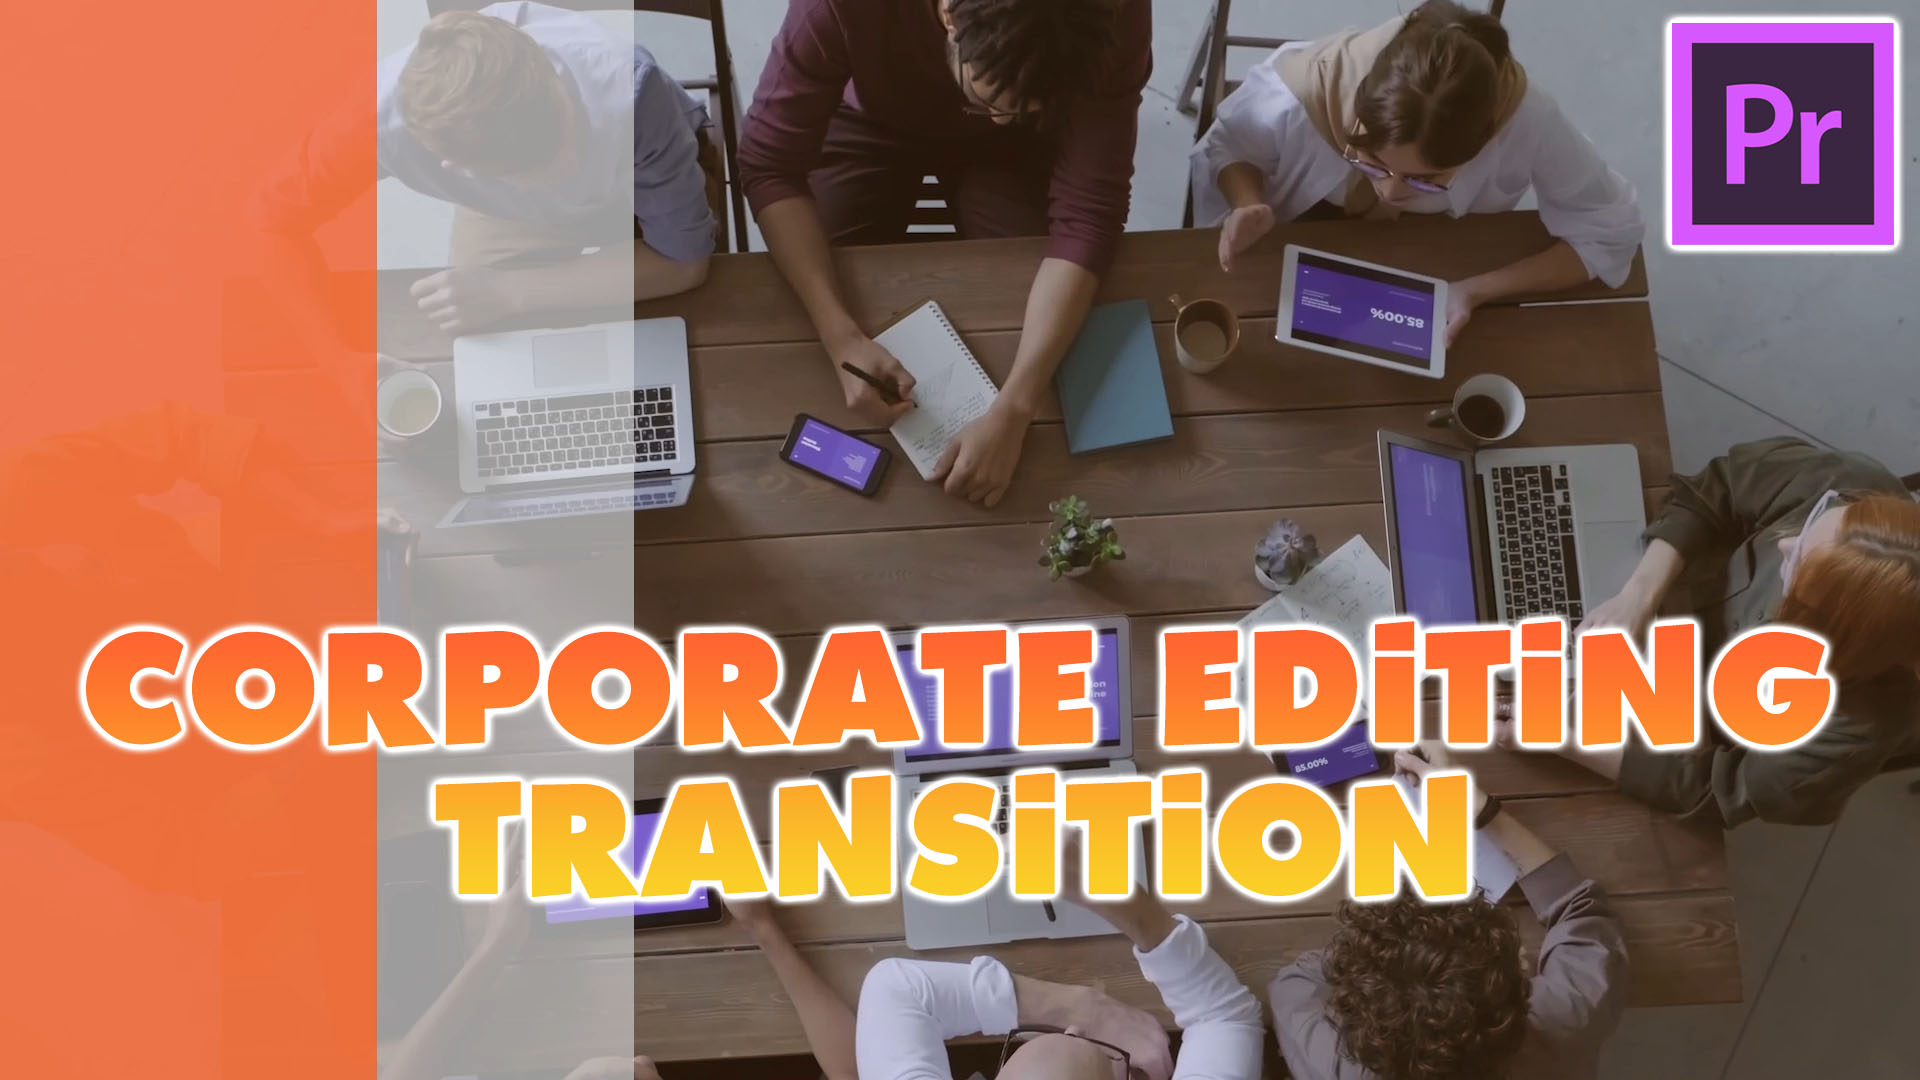 Clean Corporate Video Editing Transition (Premiere Pro Tutorial)